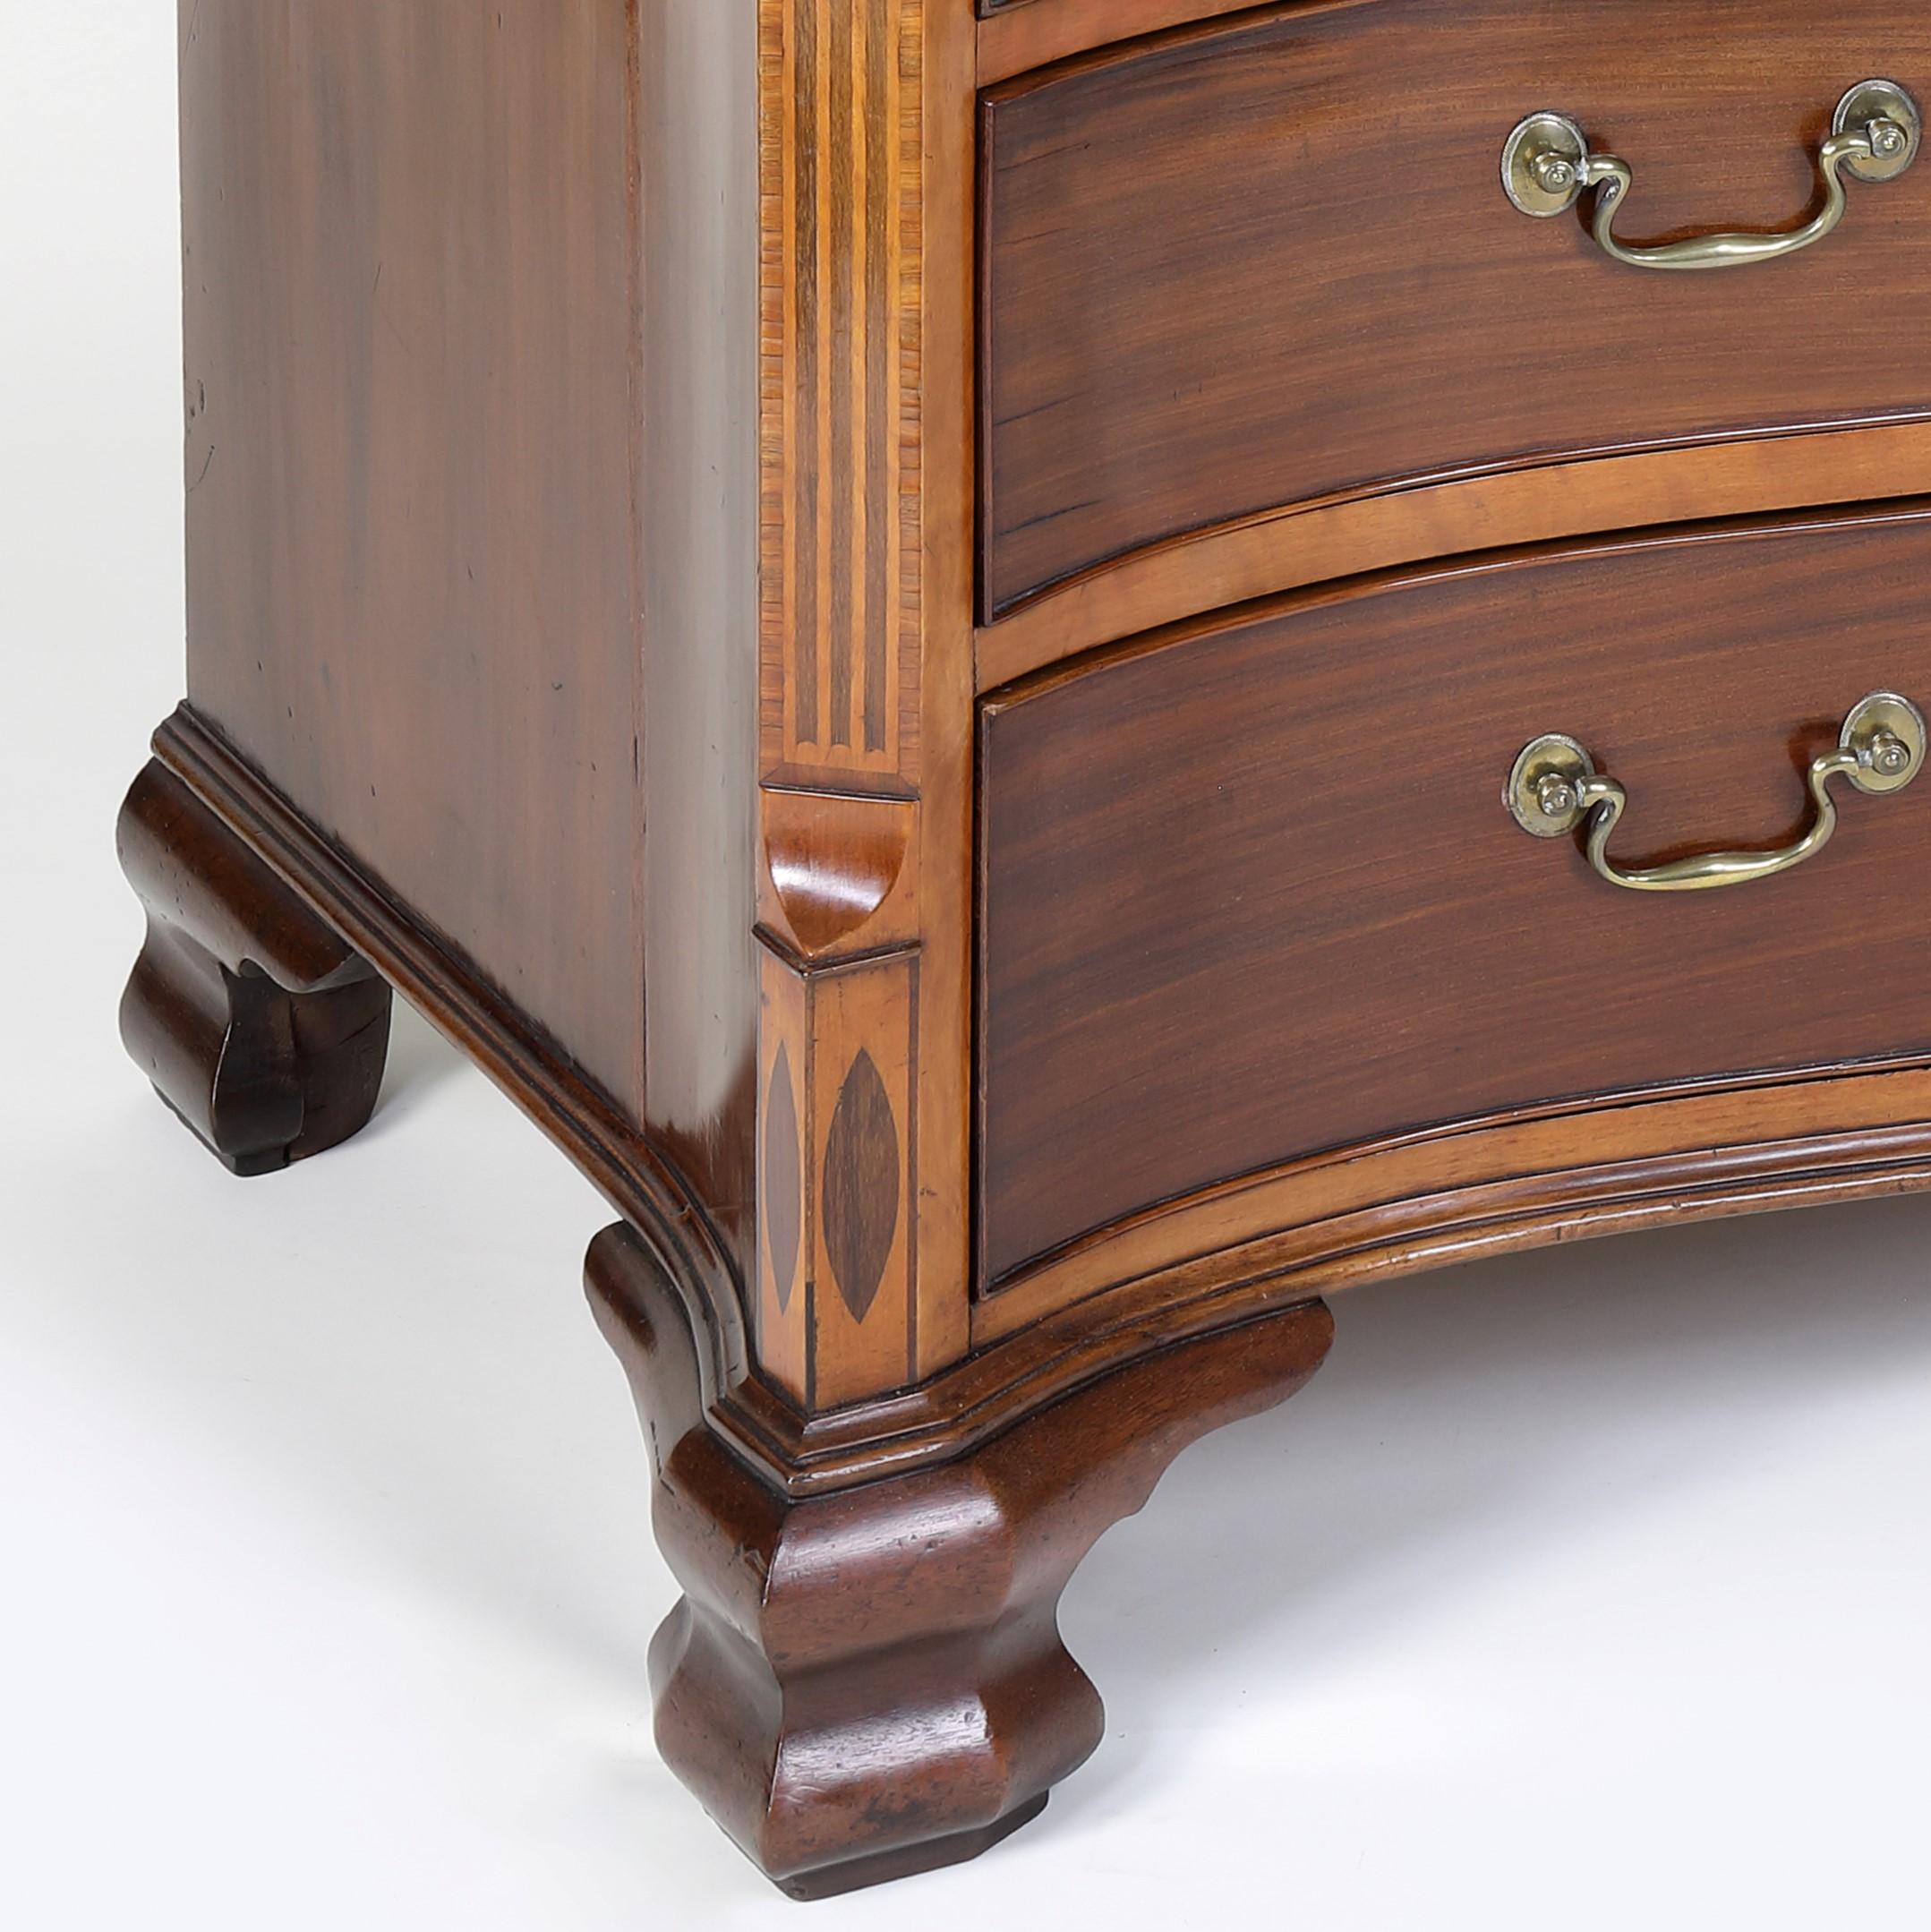 18th Century Georgian Serpentine Shaped Mahogany and Satinwood Chest of Drawers